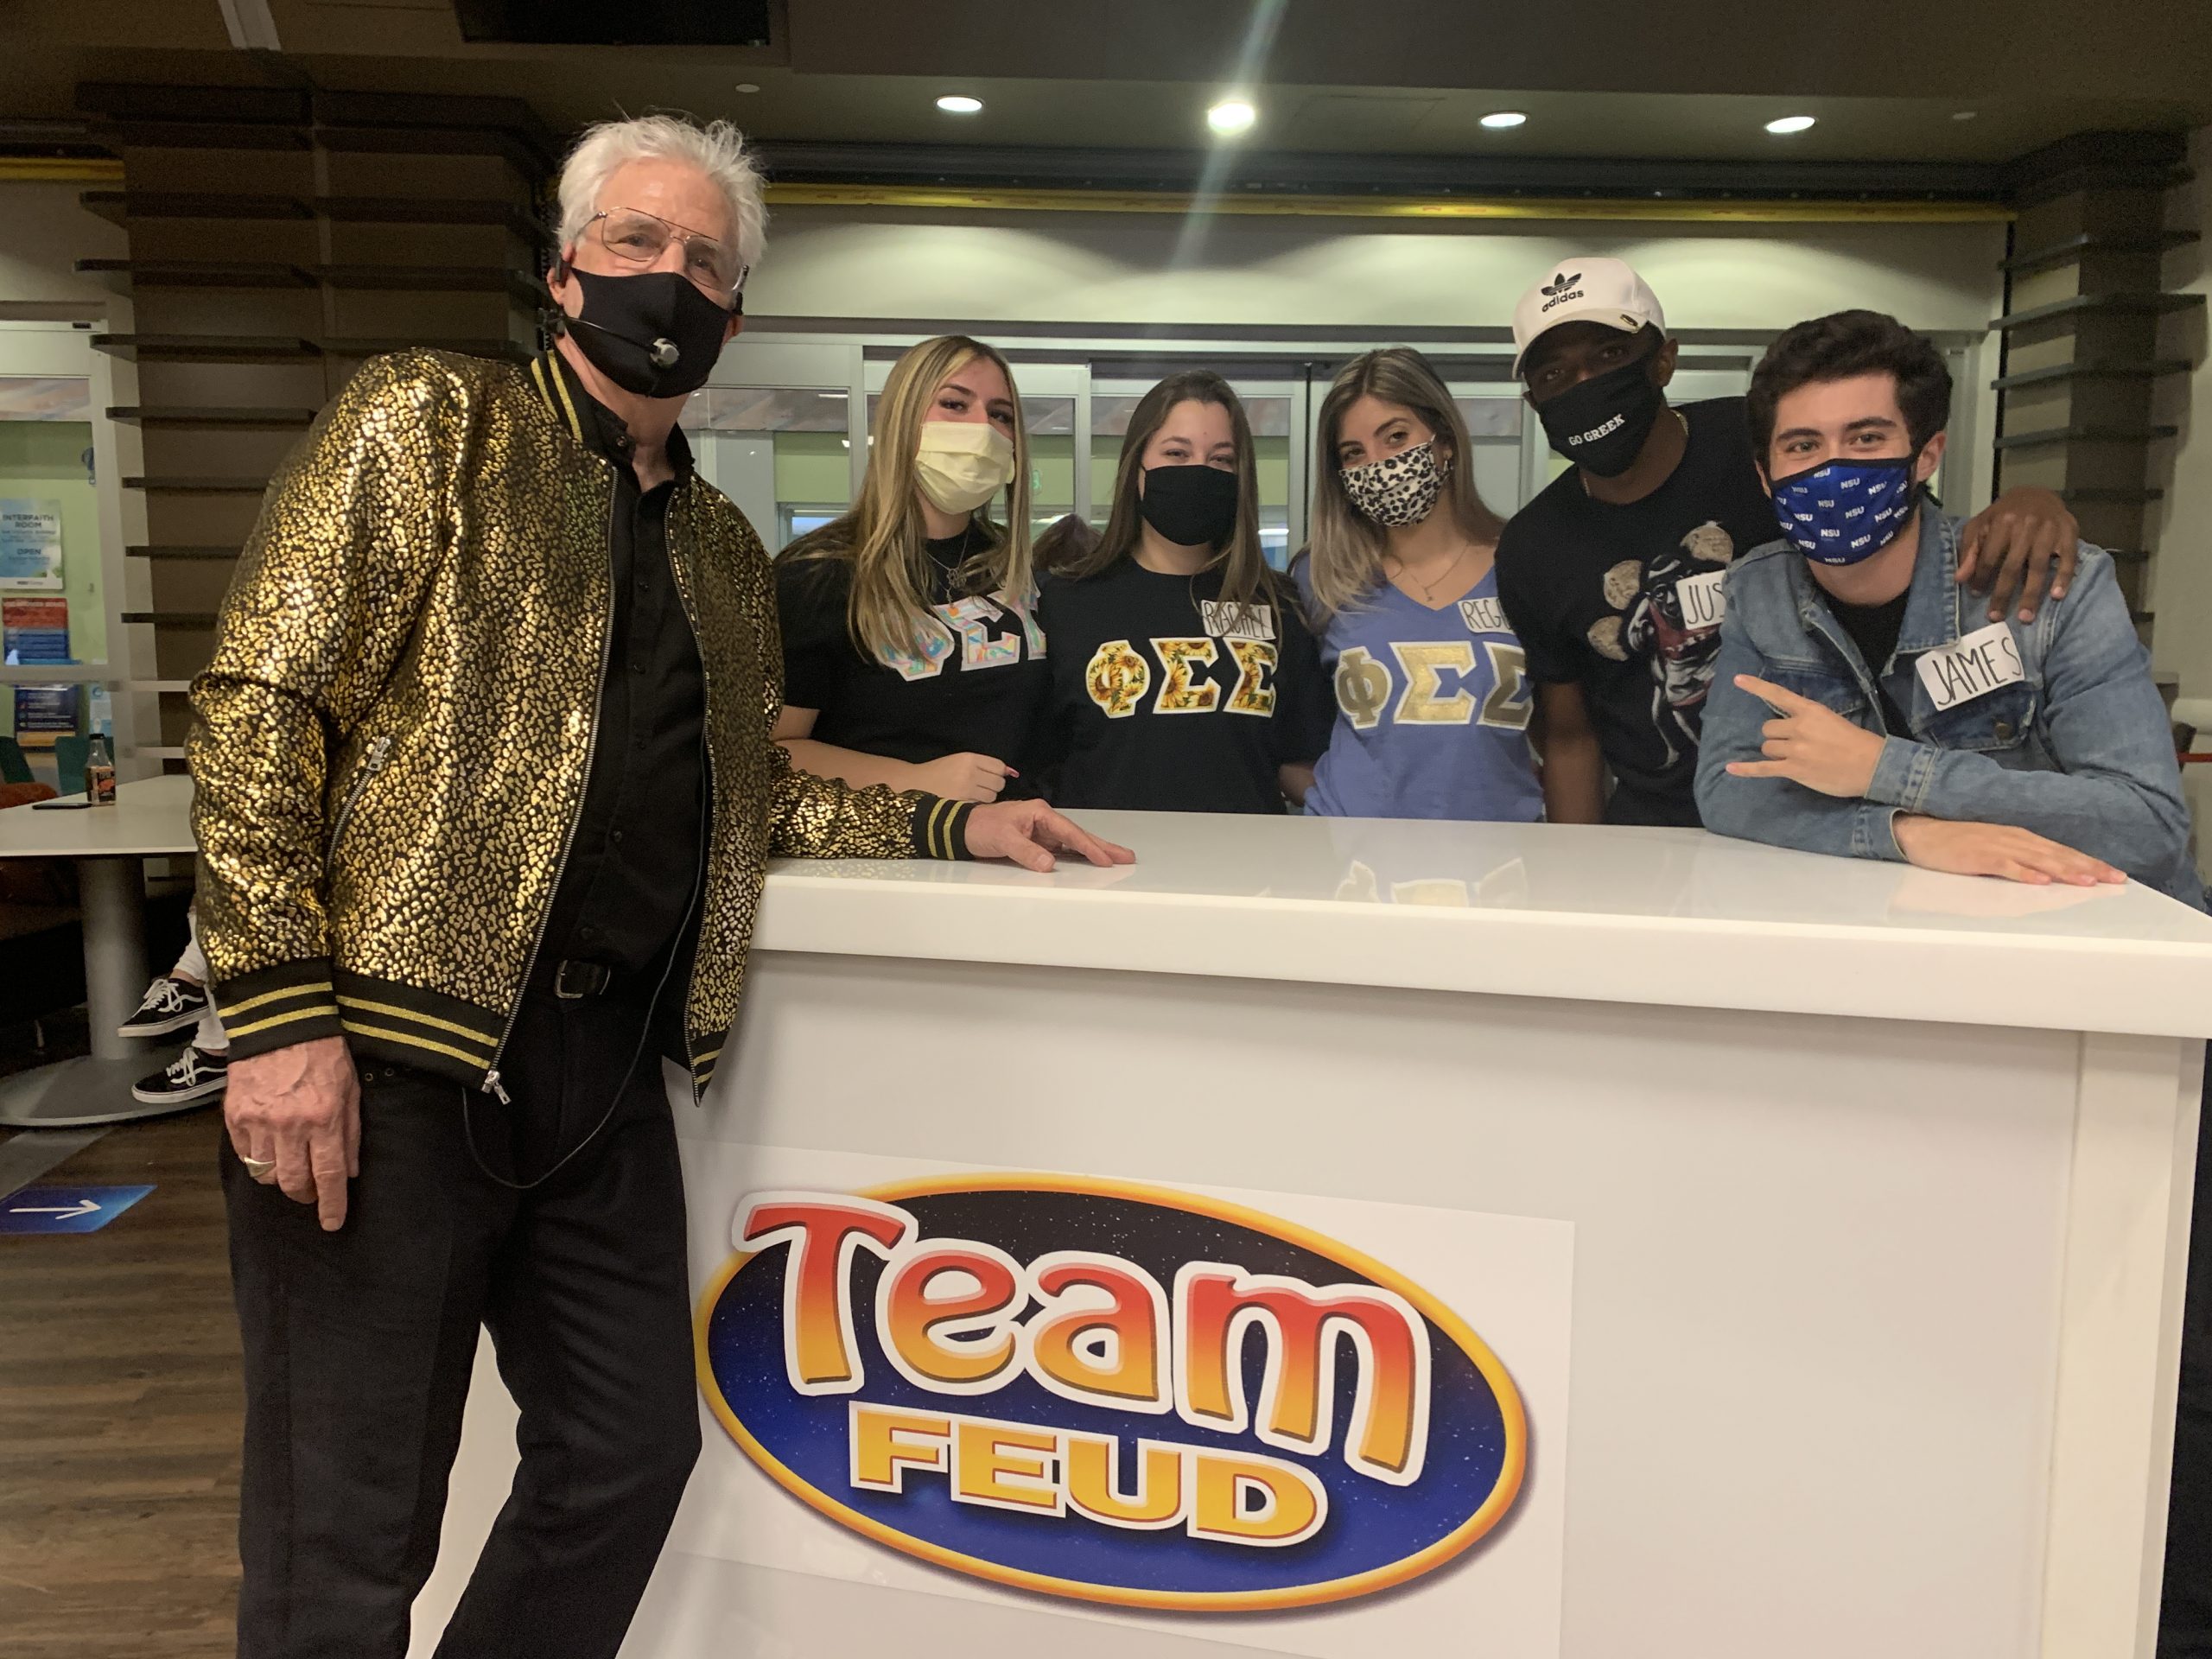 Doug Shannon's Team Feud - Game Show at FIU - students enjoying game